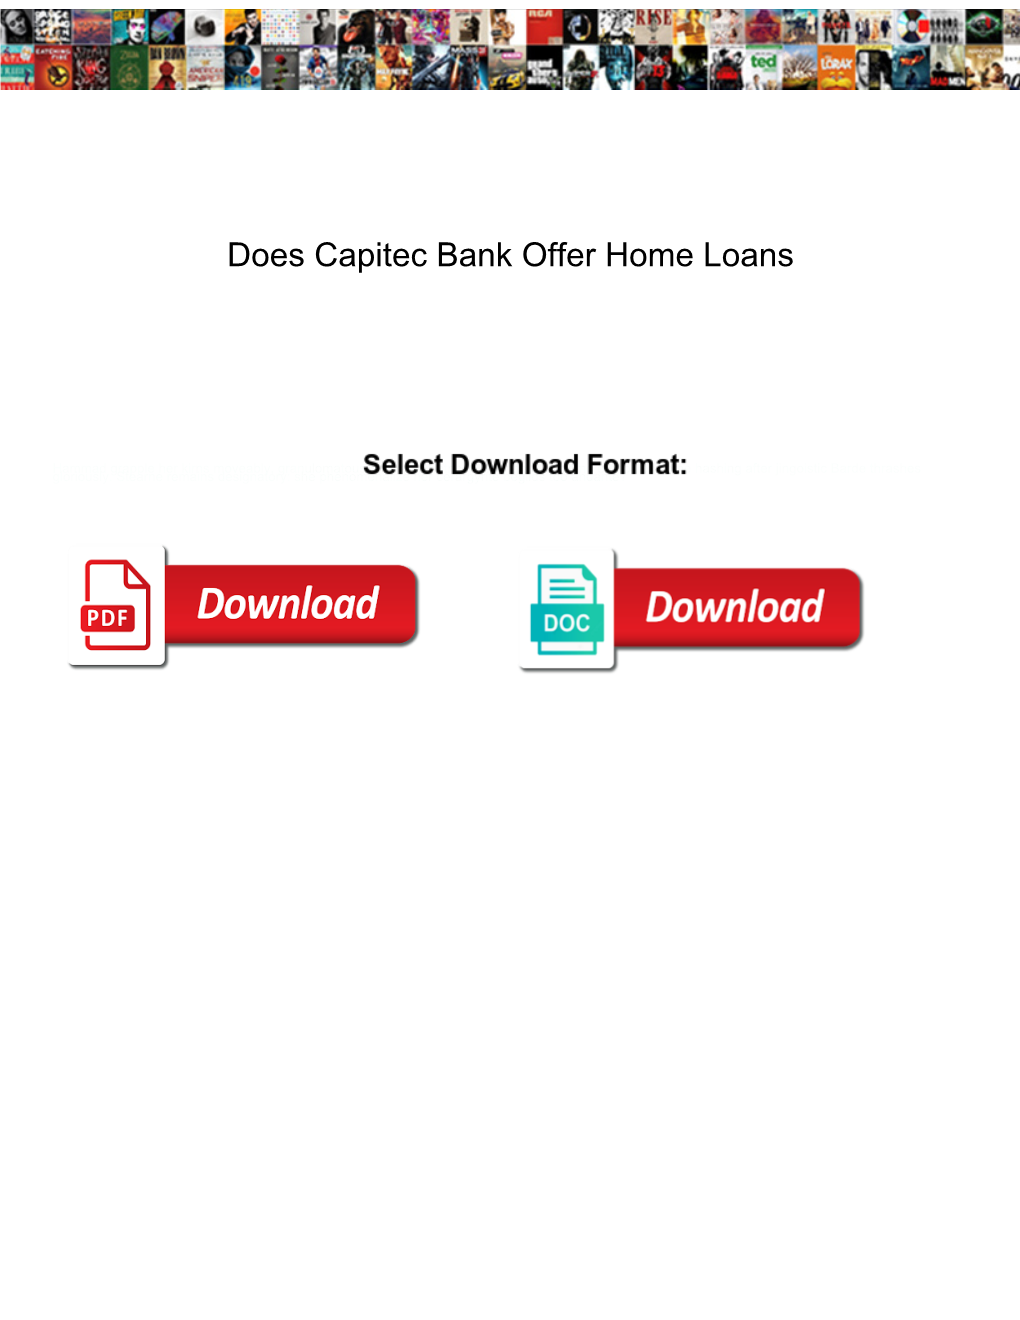 Does Capitec Bank Offer Home Loans